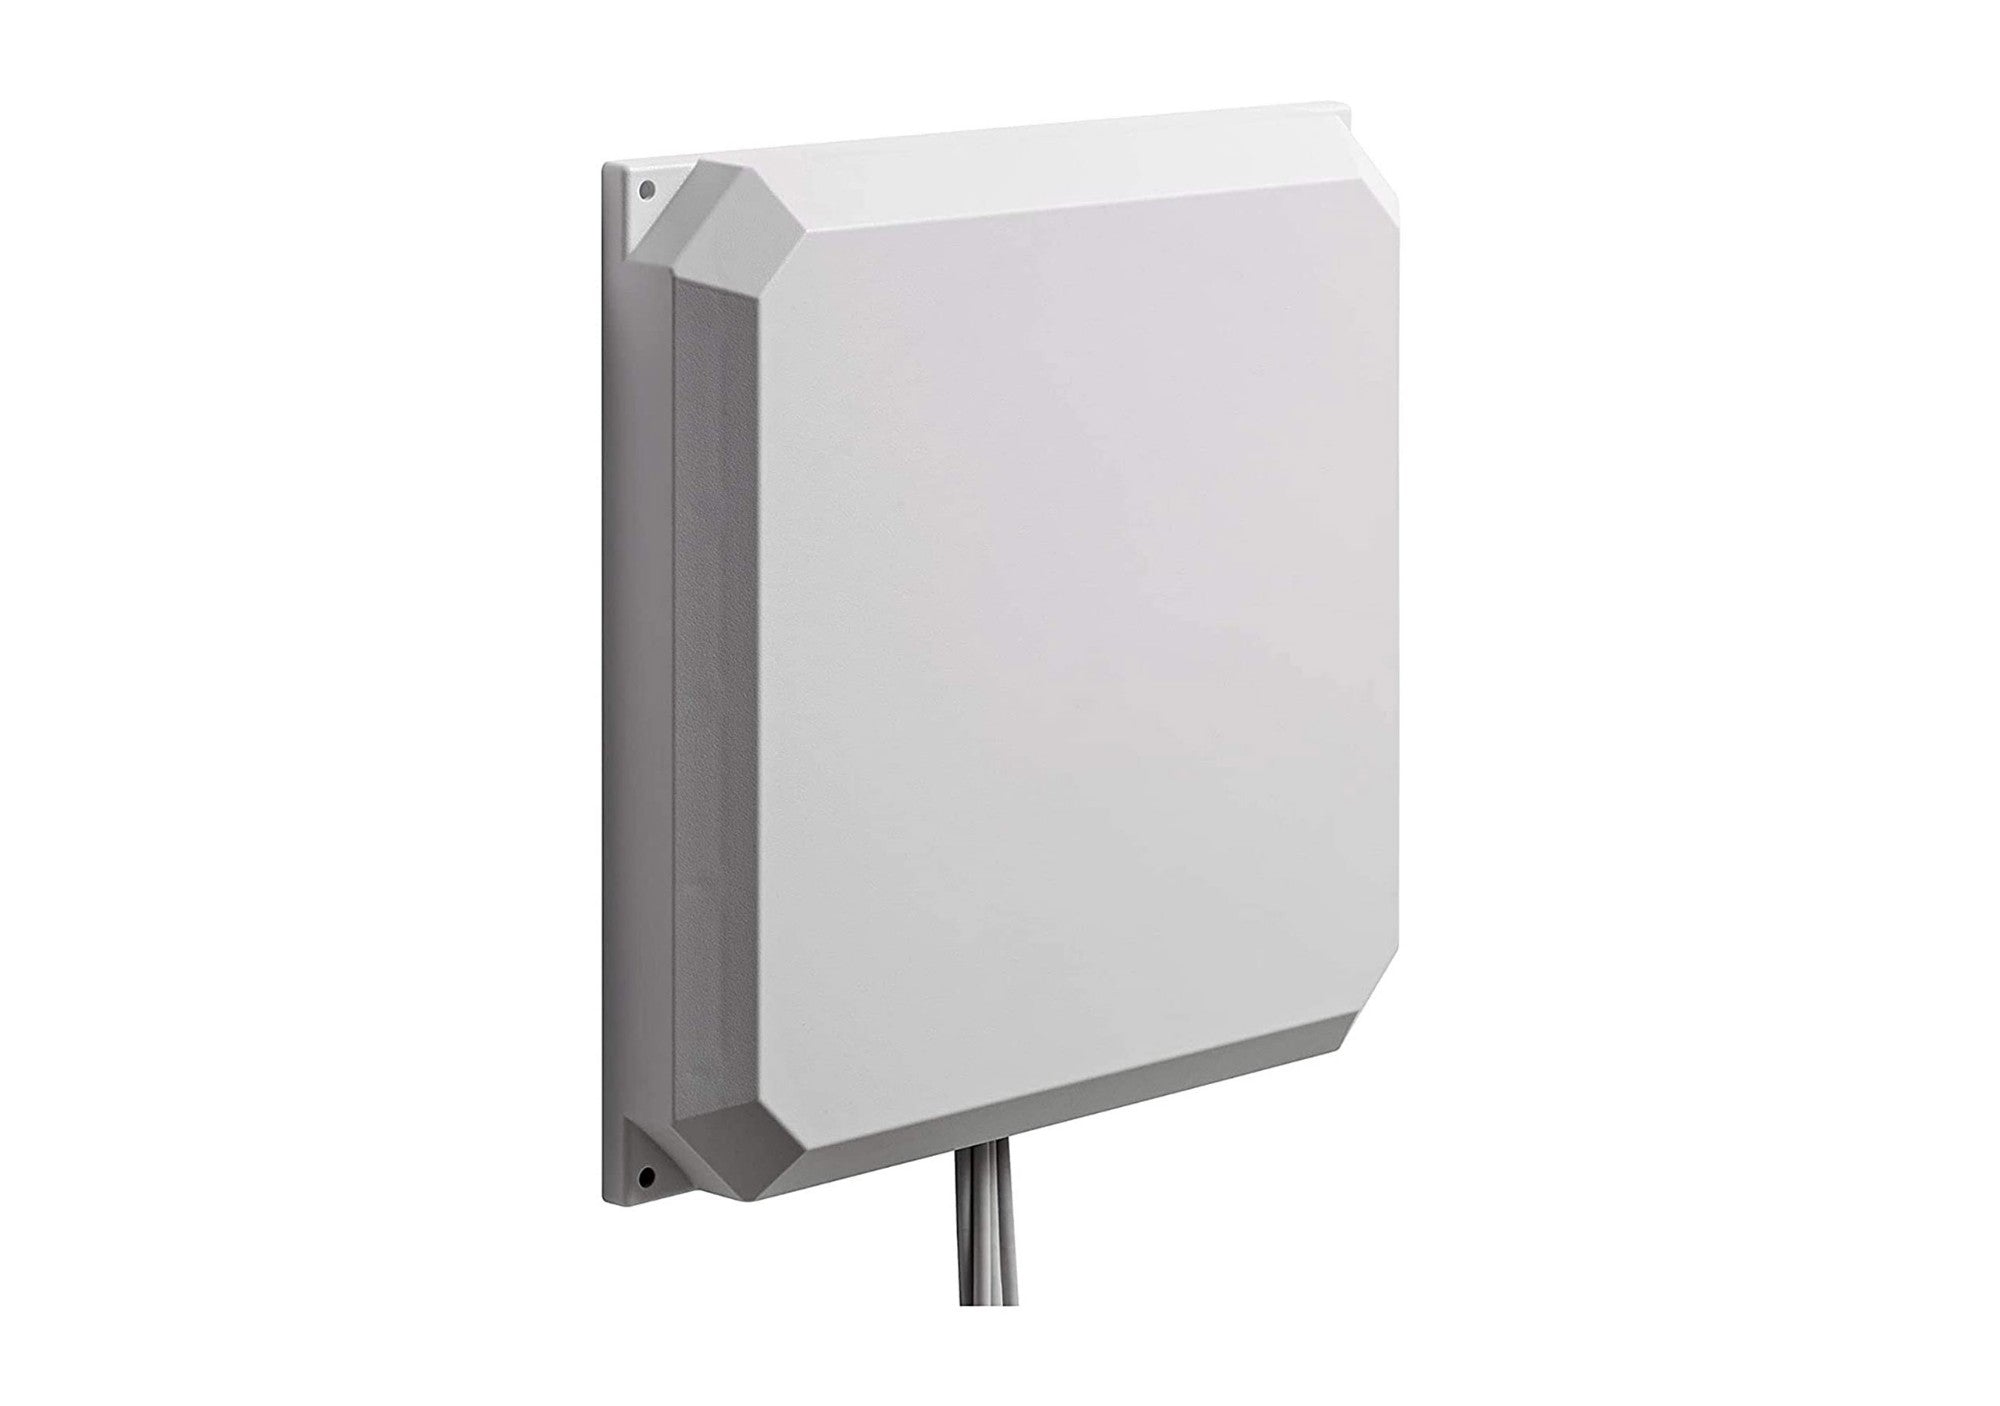 Aironet Dual-Band Directional Wi-Fi Patch Antenna